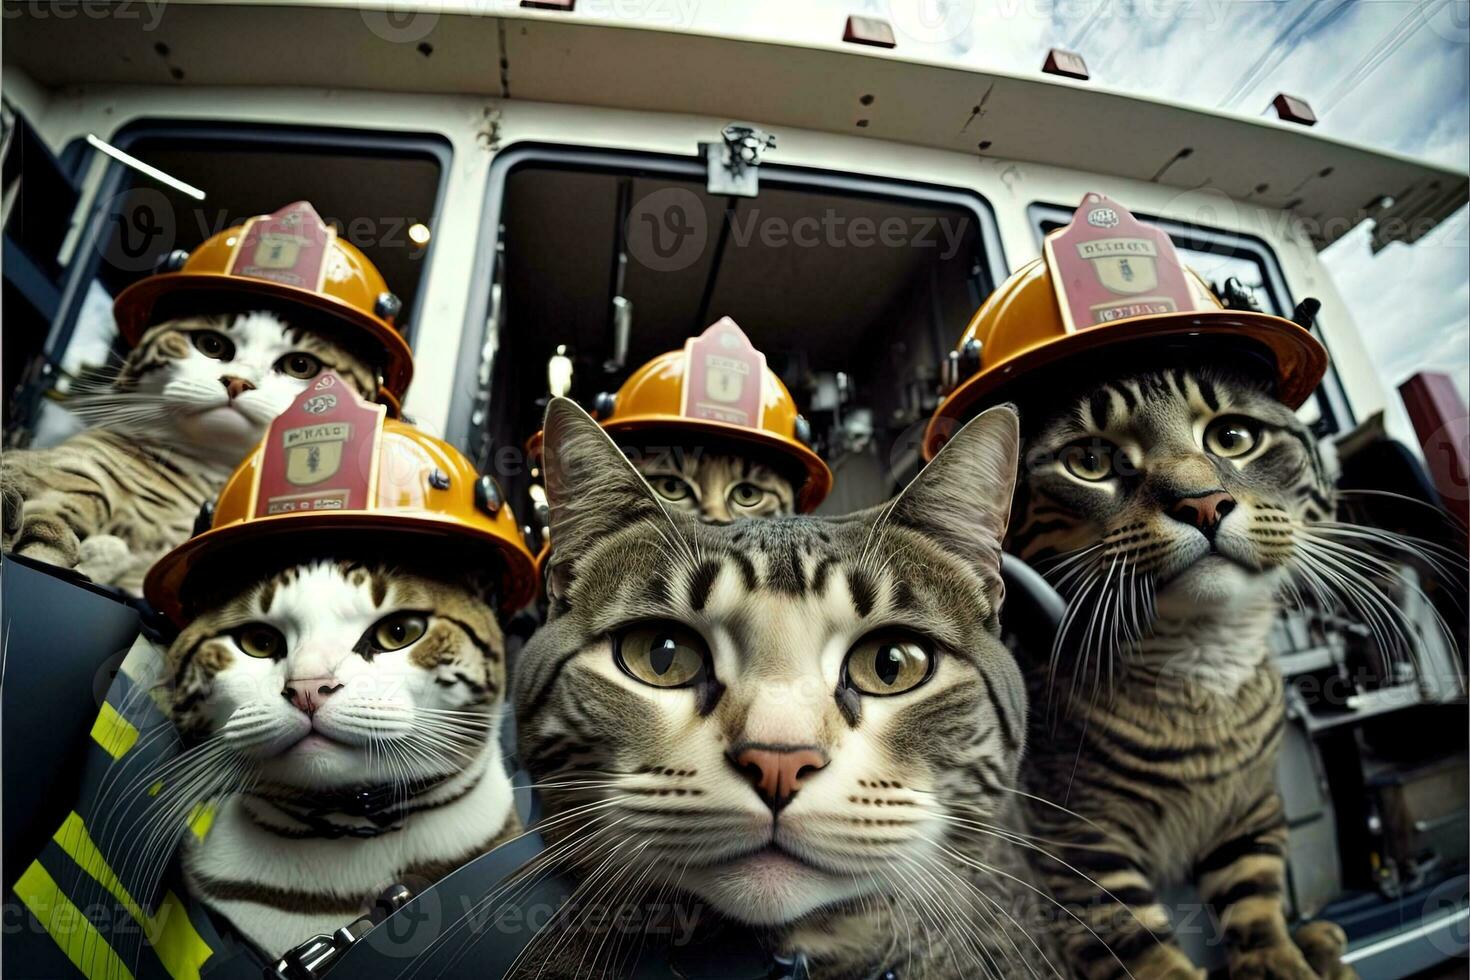 cats in a fireman suit and outfit illustration genrative ai photo